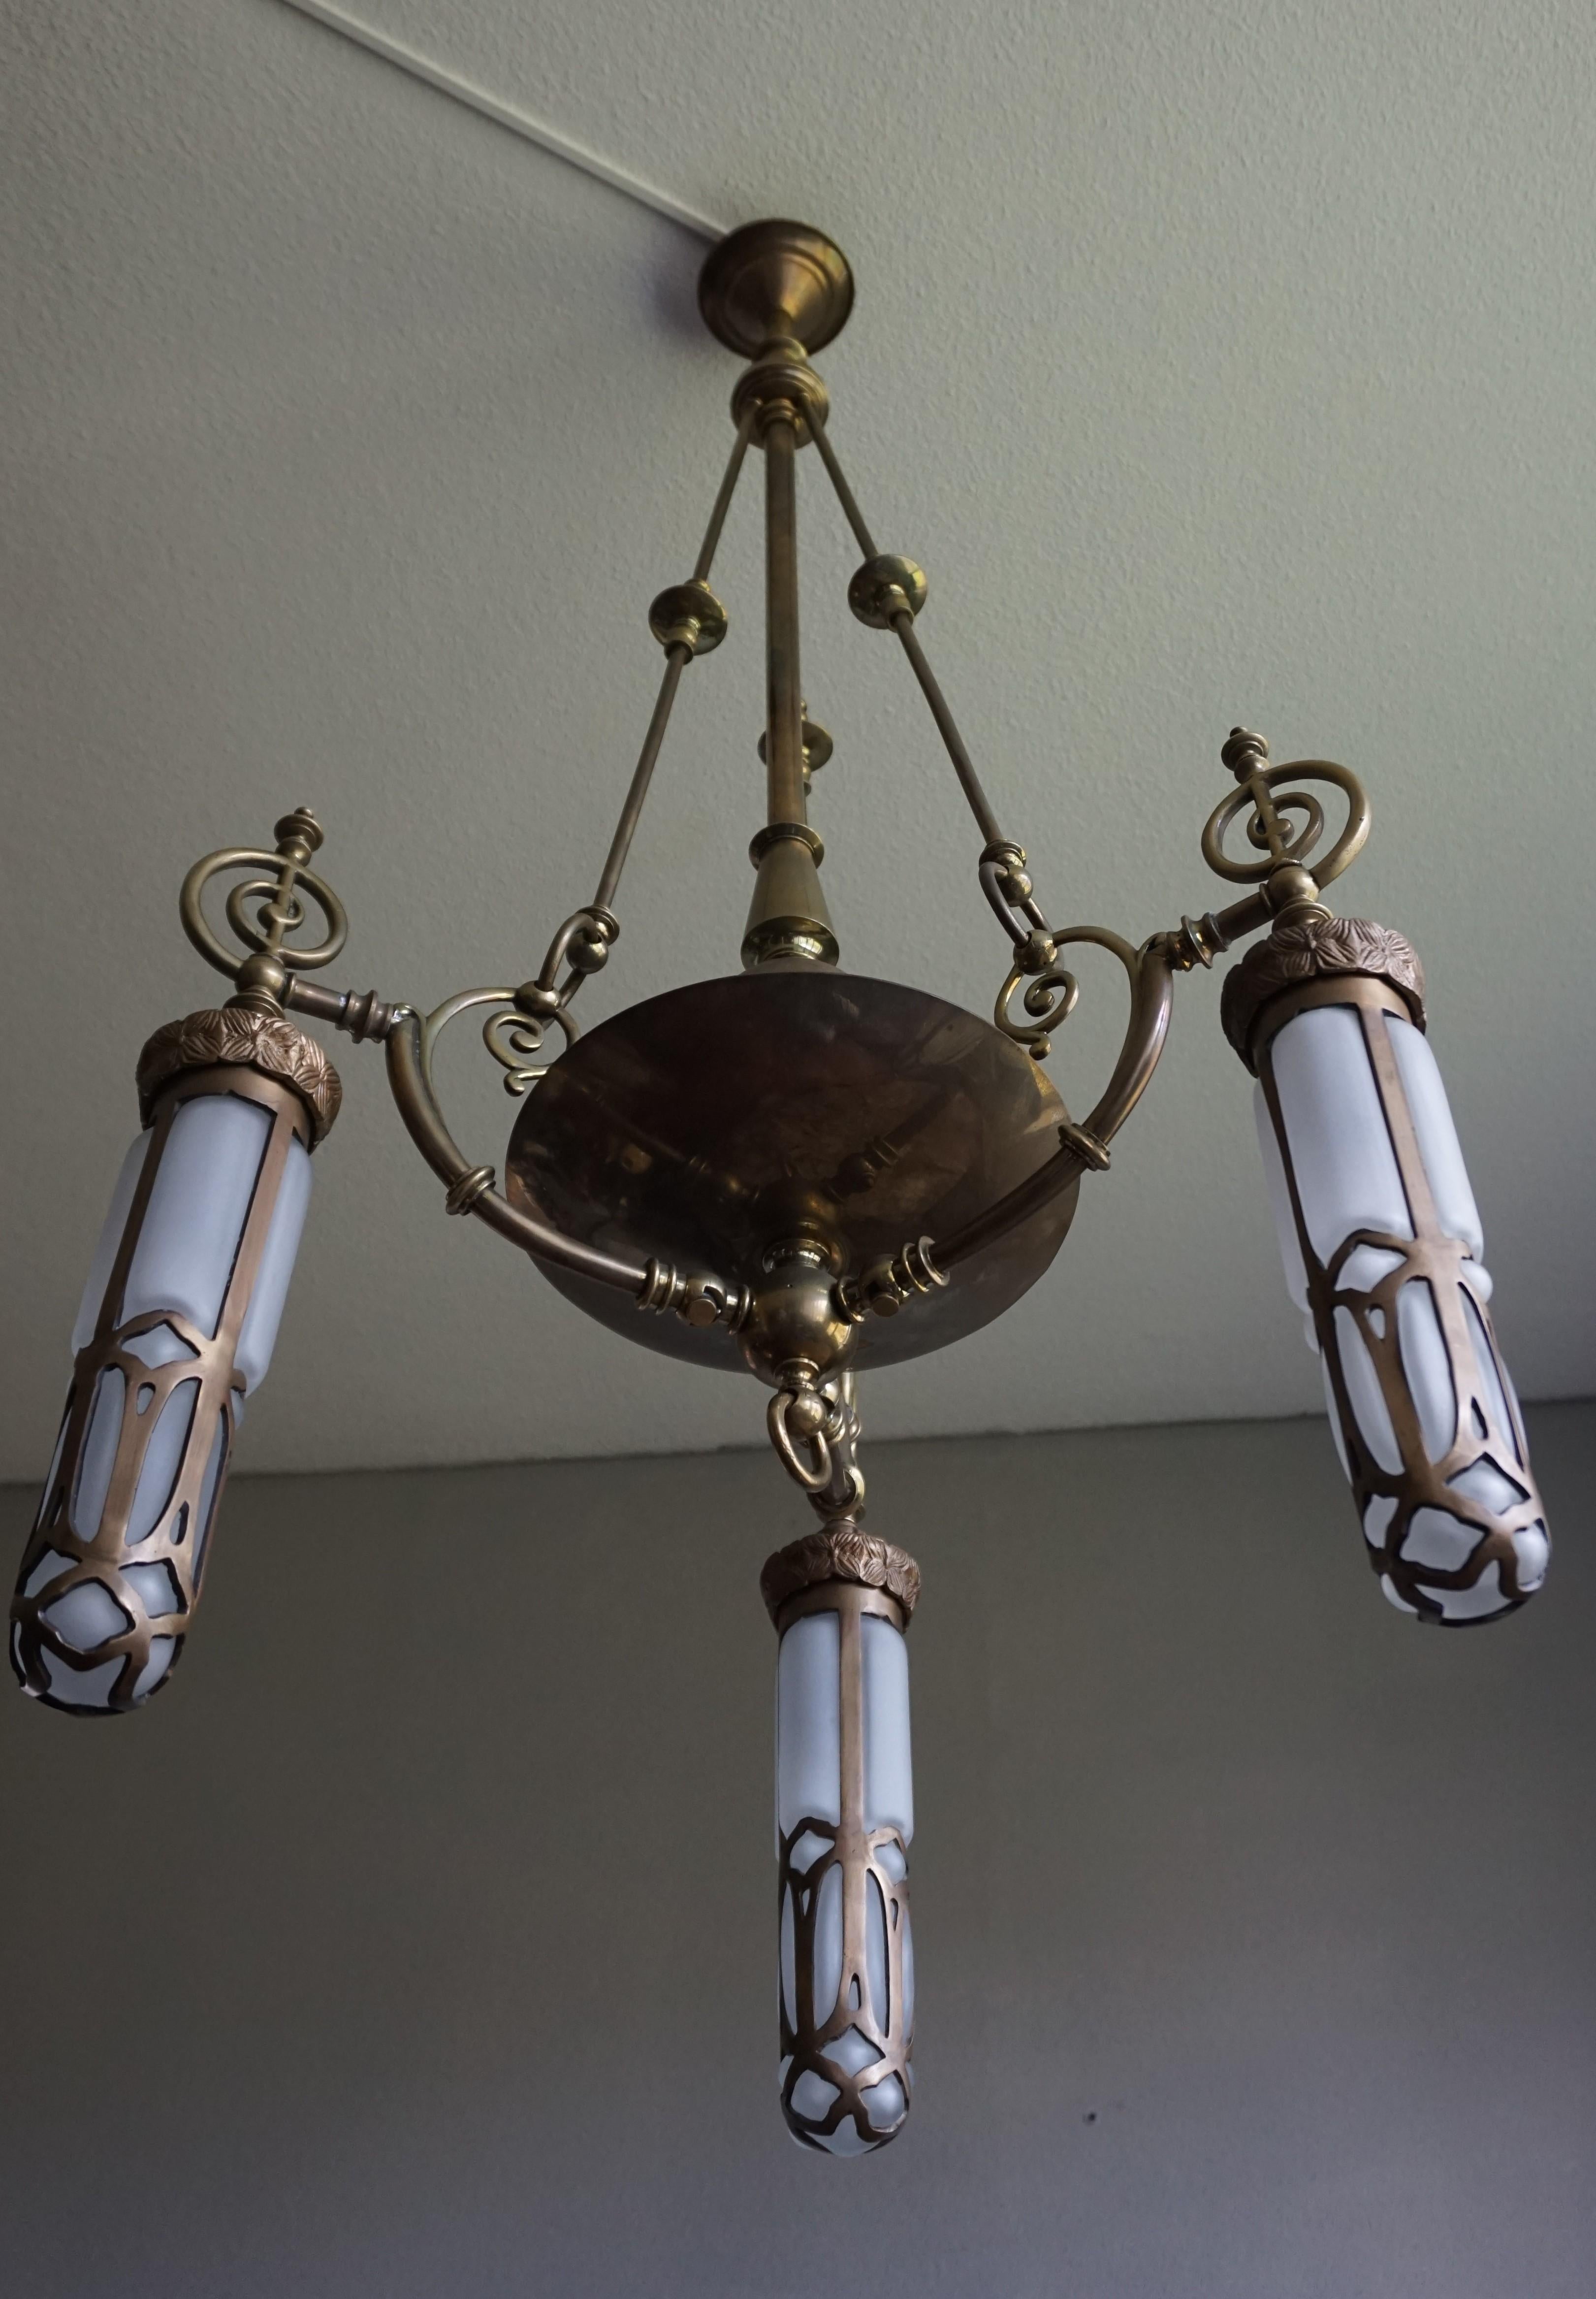 All hand-crafted and very stylish, former gas-light fixture.

If you are looking for a unique light fixture to grace your living space then this pendant could be the one. This handsome work of lighting art from the 1890s was originally made as a